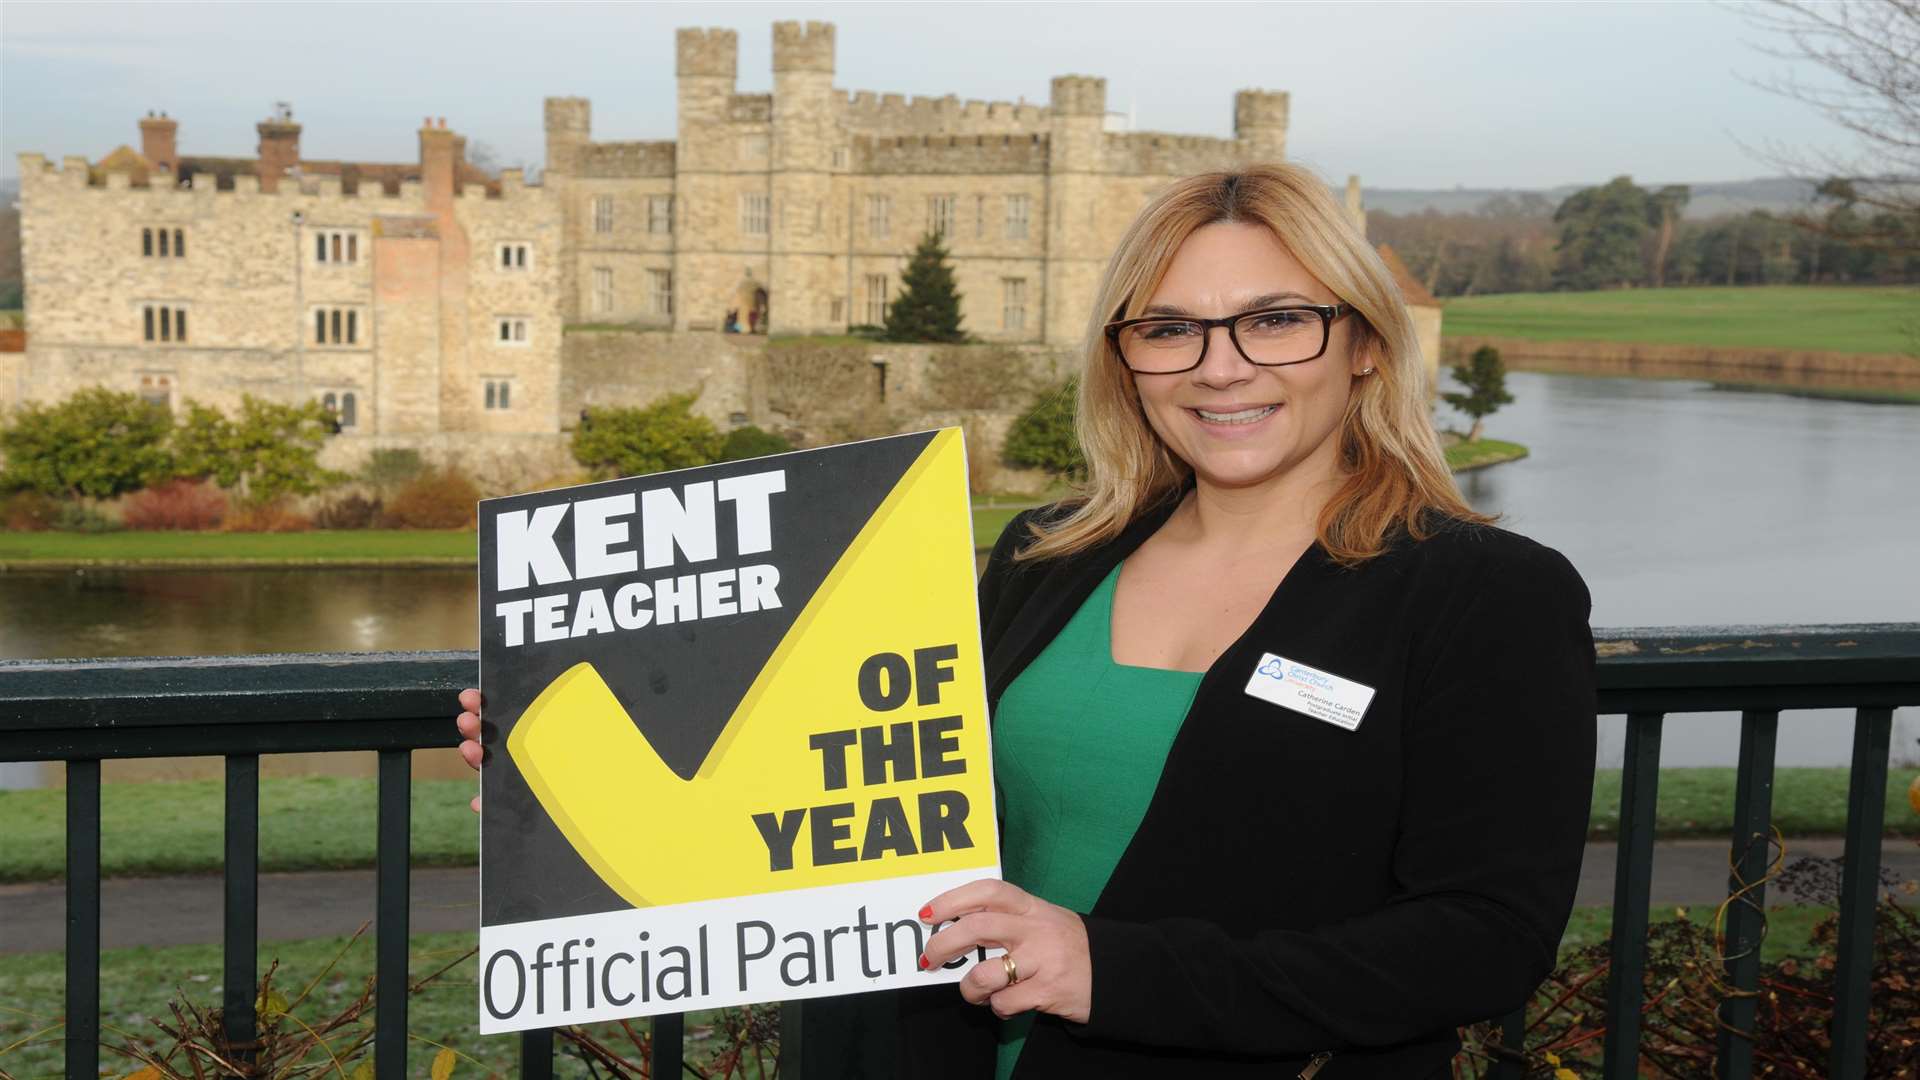 Catherine Carden from Canterbury Christ Church University announces support of the Kent Teacher of the Year Awards 2015 at Leeds Castle.